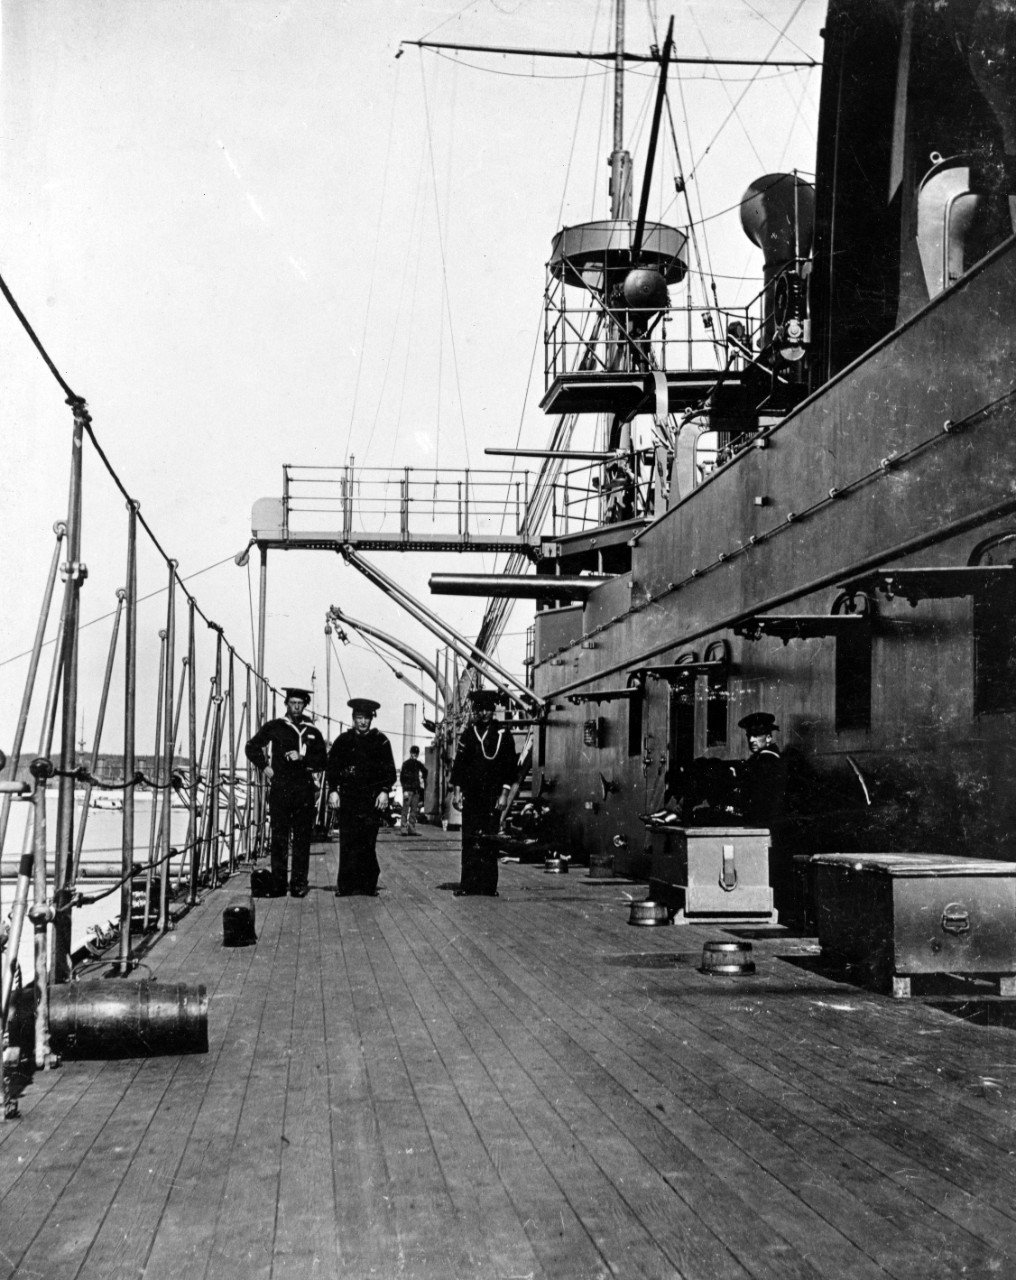 A photo of sailors on the port deck side of the U.S.S. Maine.